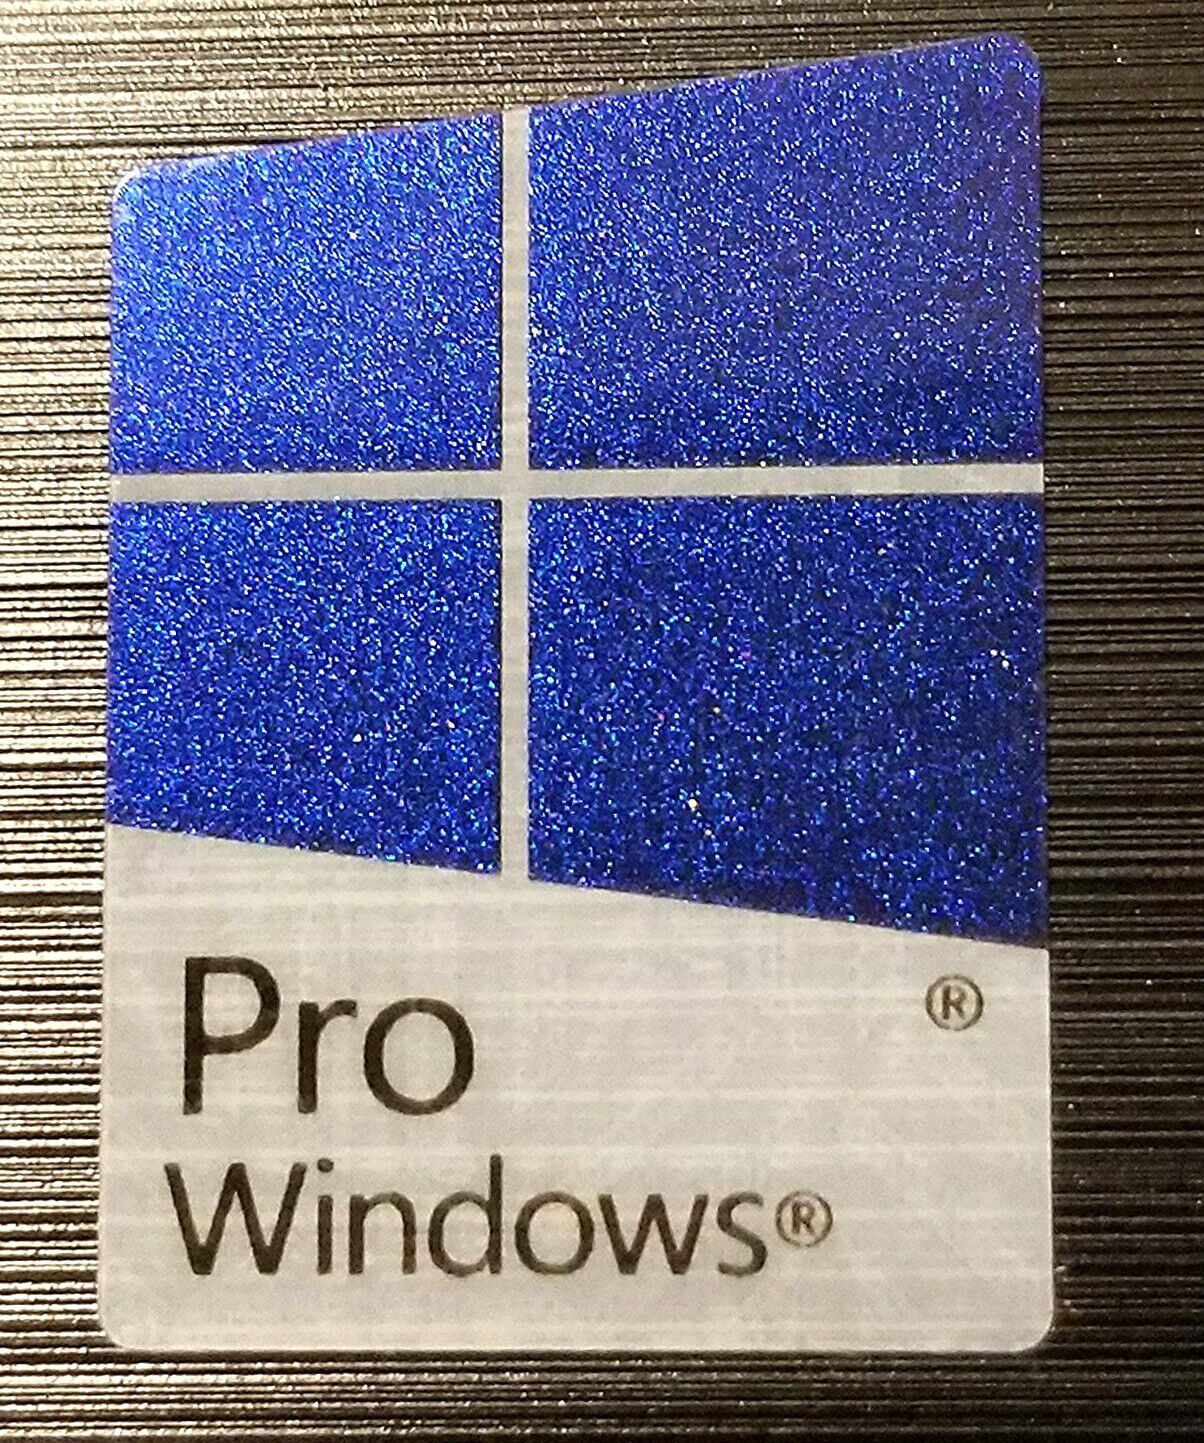 Windows 10 Pro Blue Sticker 16mm X 22mm Color Changing Reflective!!